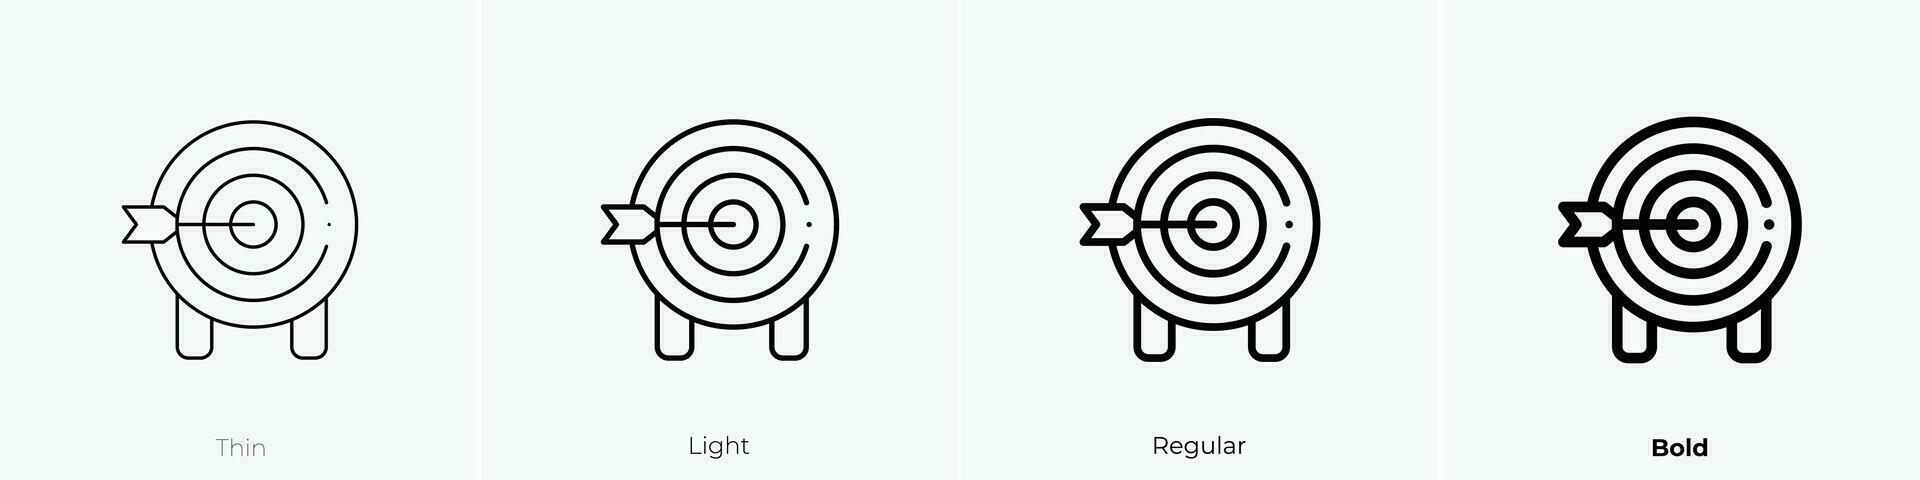 target icon. Thin, Light, Regular And Bold style design isolated on white background vector